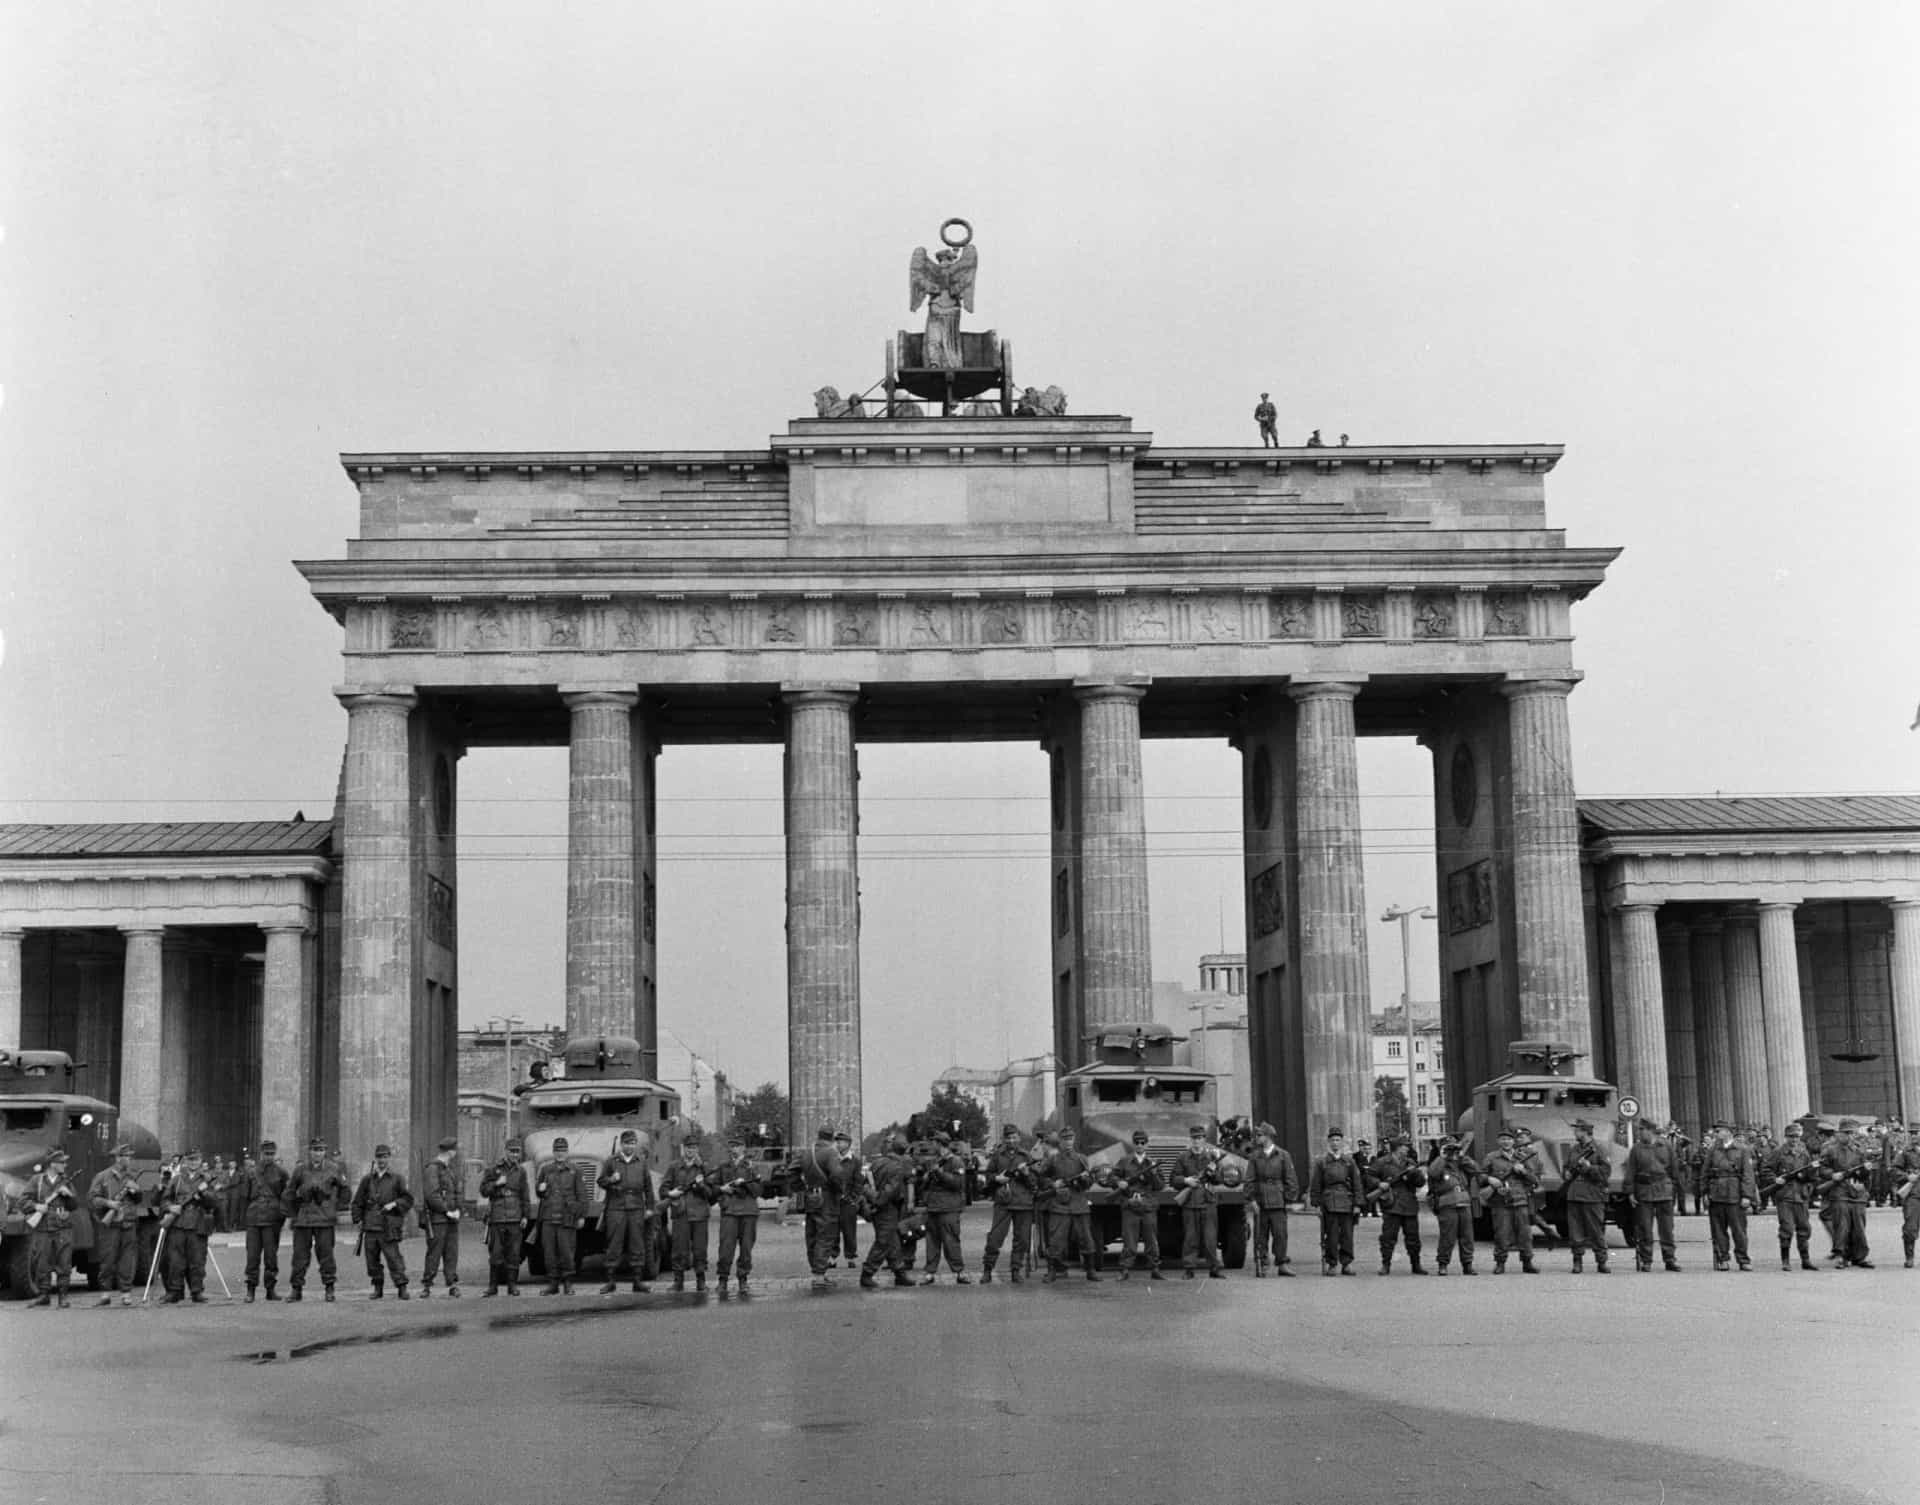 <p>Pictured: members of the Combat Group of the Working Class, deployed to protect the border, stand ready at the Brandenburg Gate, protected by an armored scout vehicle of the border police.</p><p><a href="https://www.msn.com/en-us/community/channel/vid-7xx8mnucu55yw63we9va2gwr7uihbxwc68fxqp25x6tg4ftibpra?cvid=94631541bc0f4f89bfd59158d696ad7e">Follow us and access great exclusive content everyday</a></p>